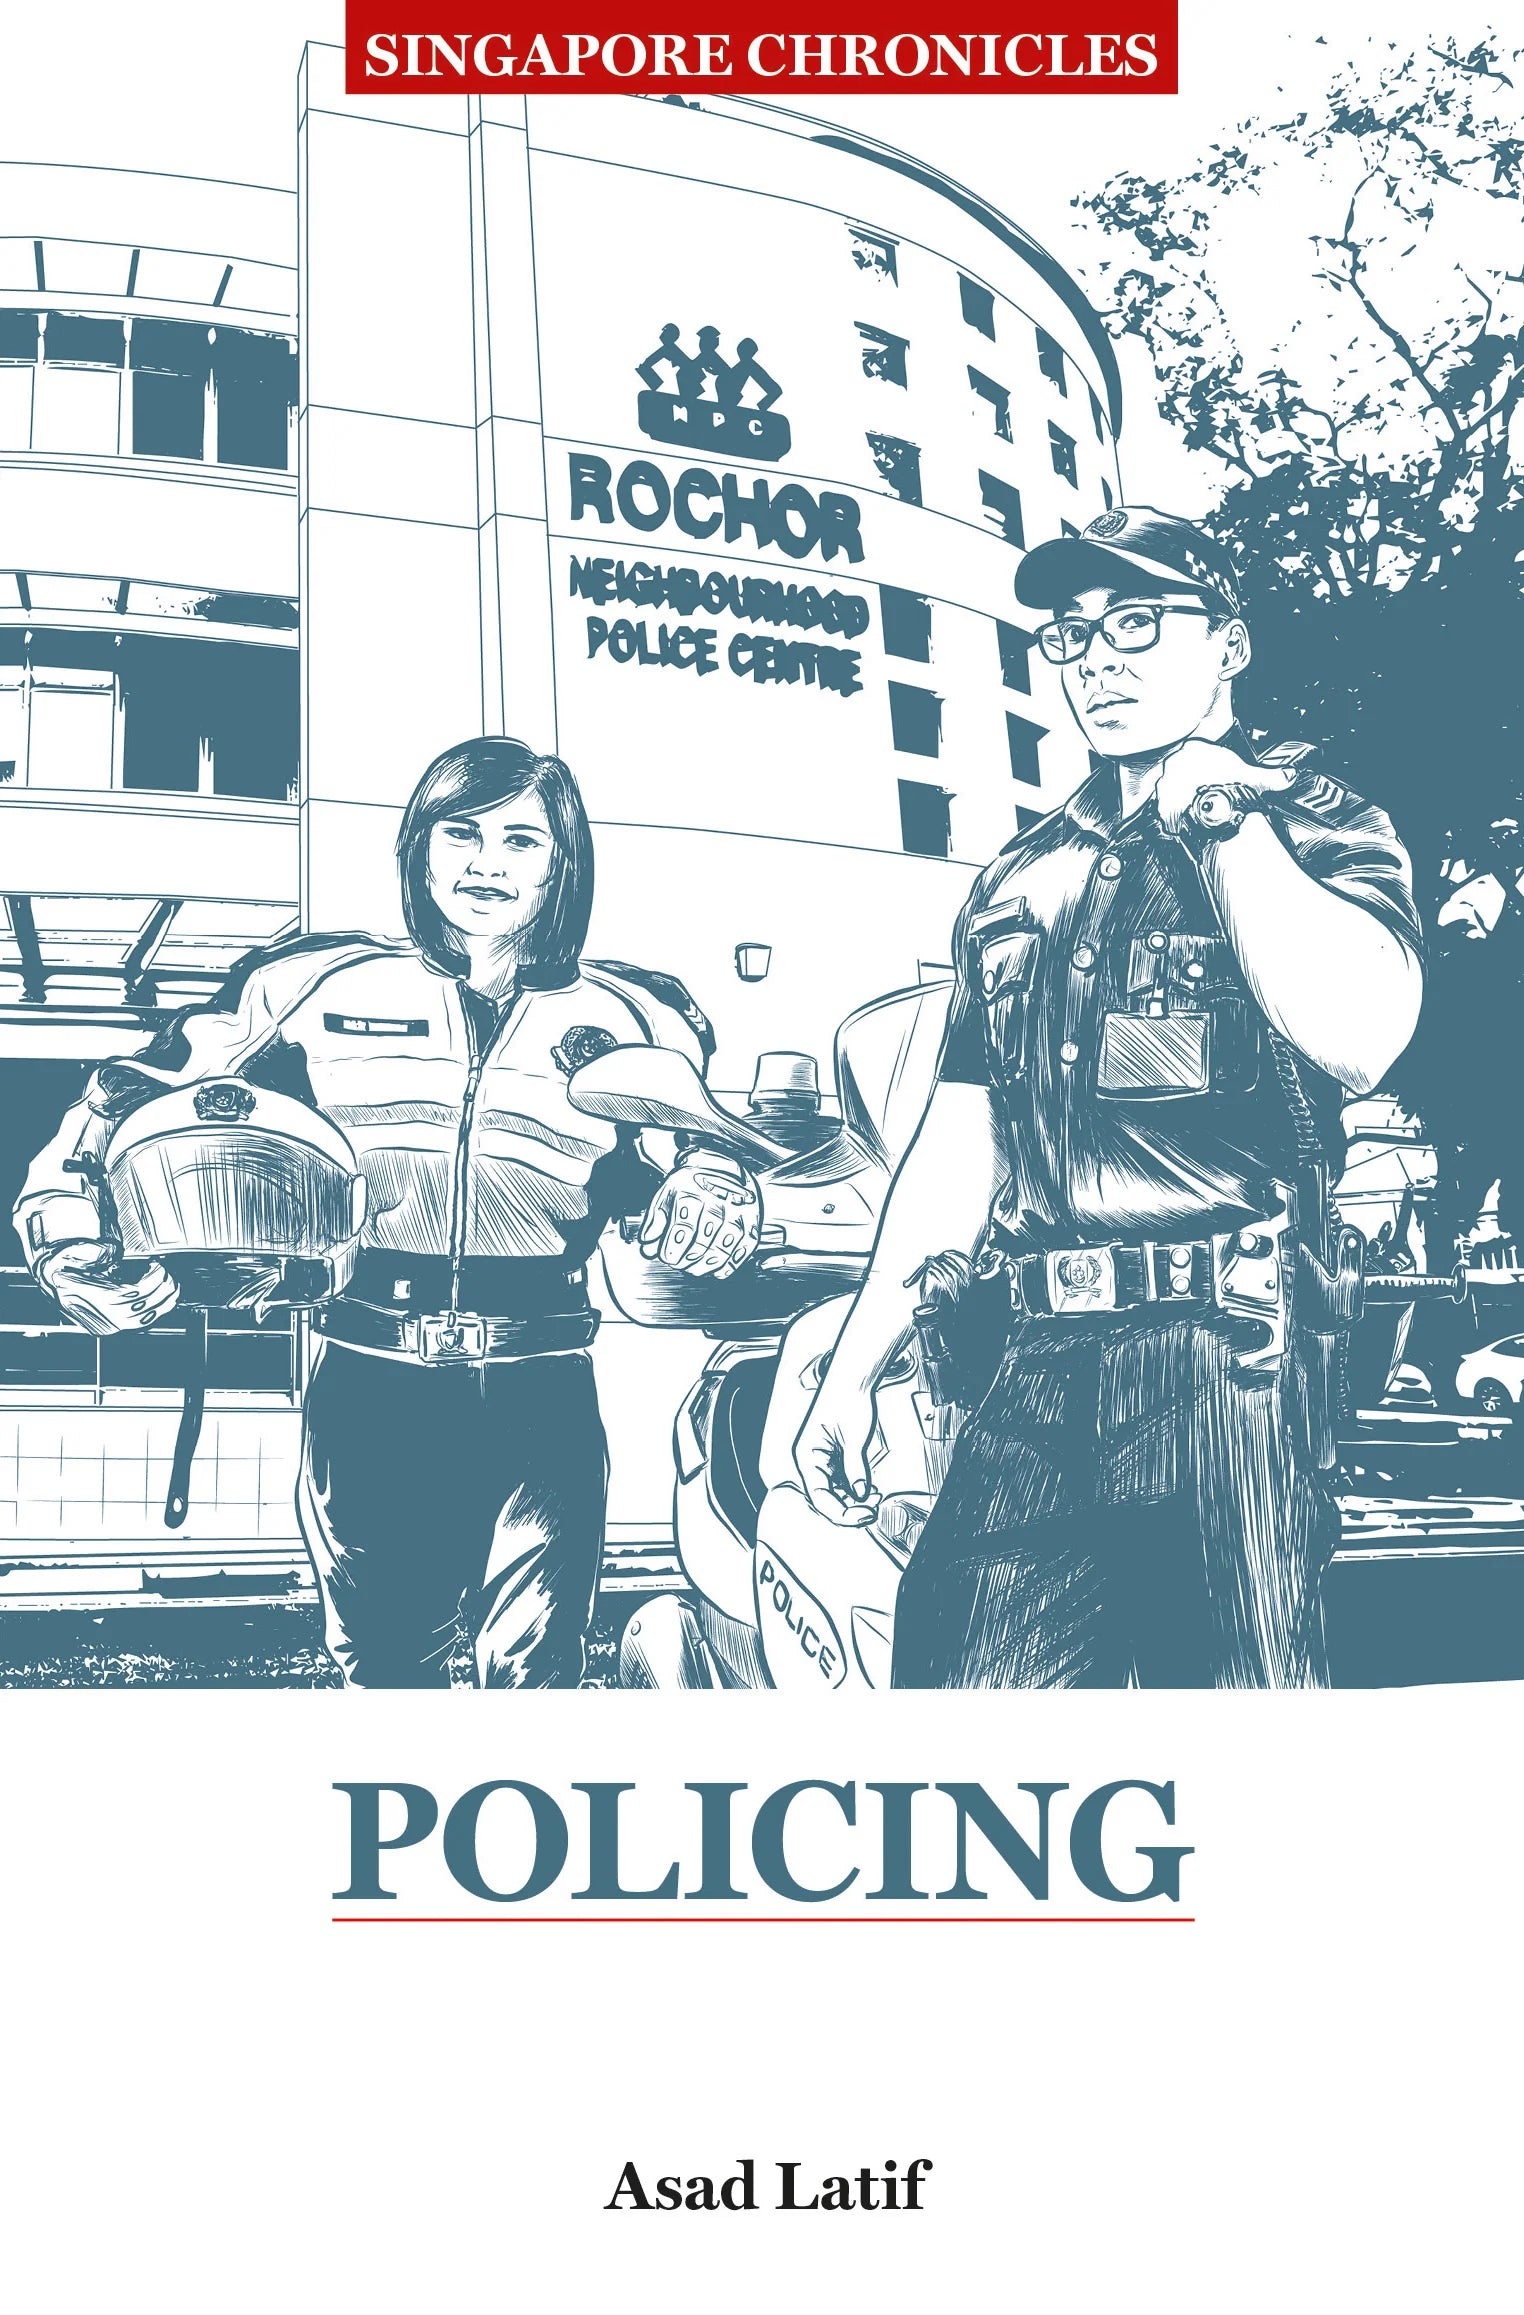 Singapore Chronicles: Policing